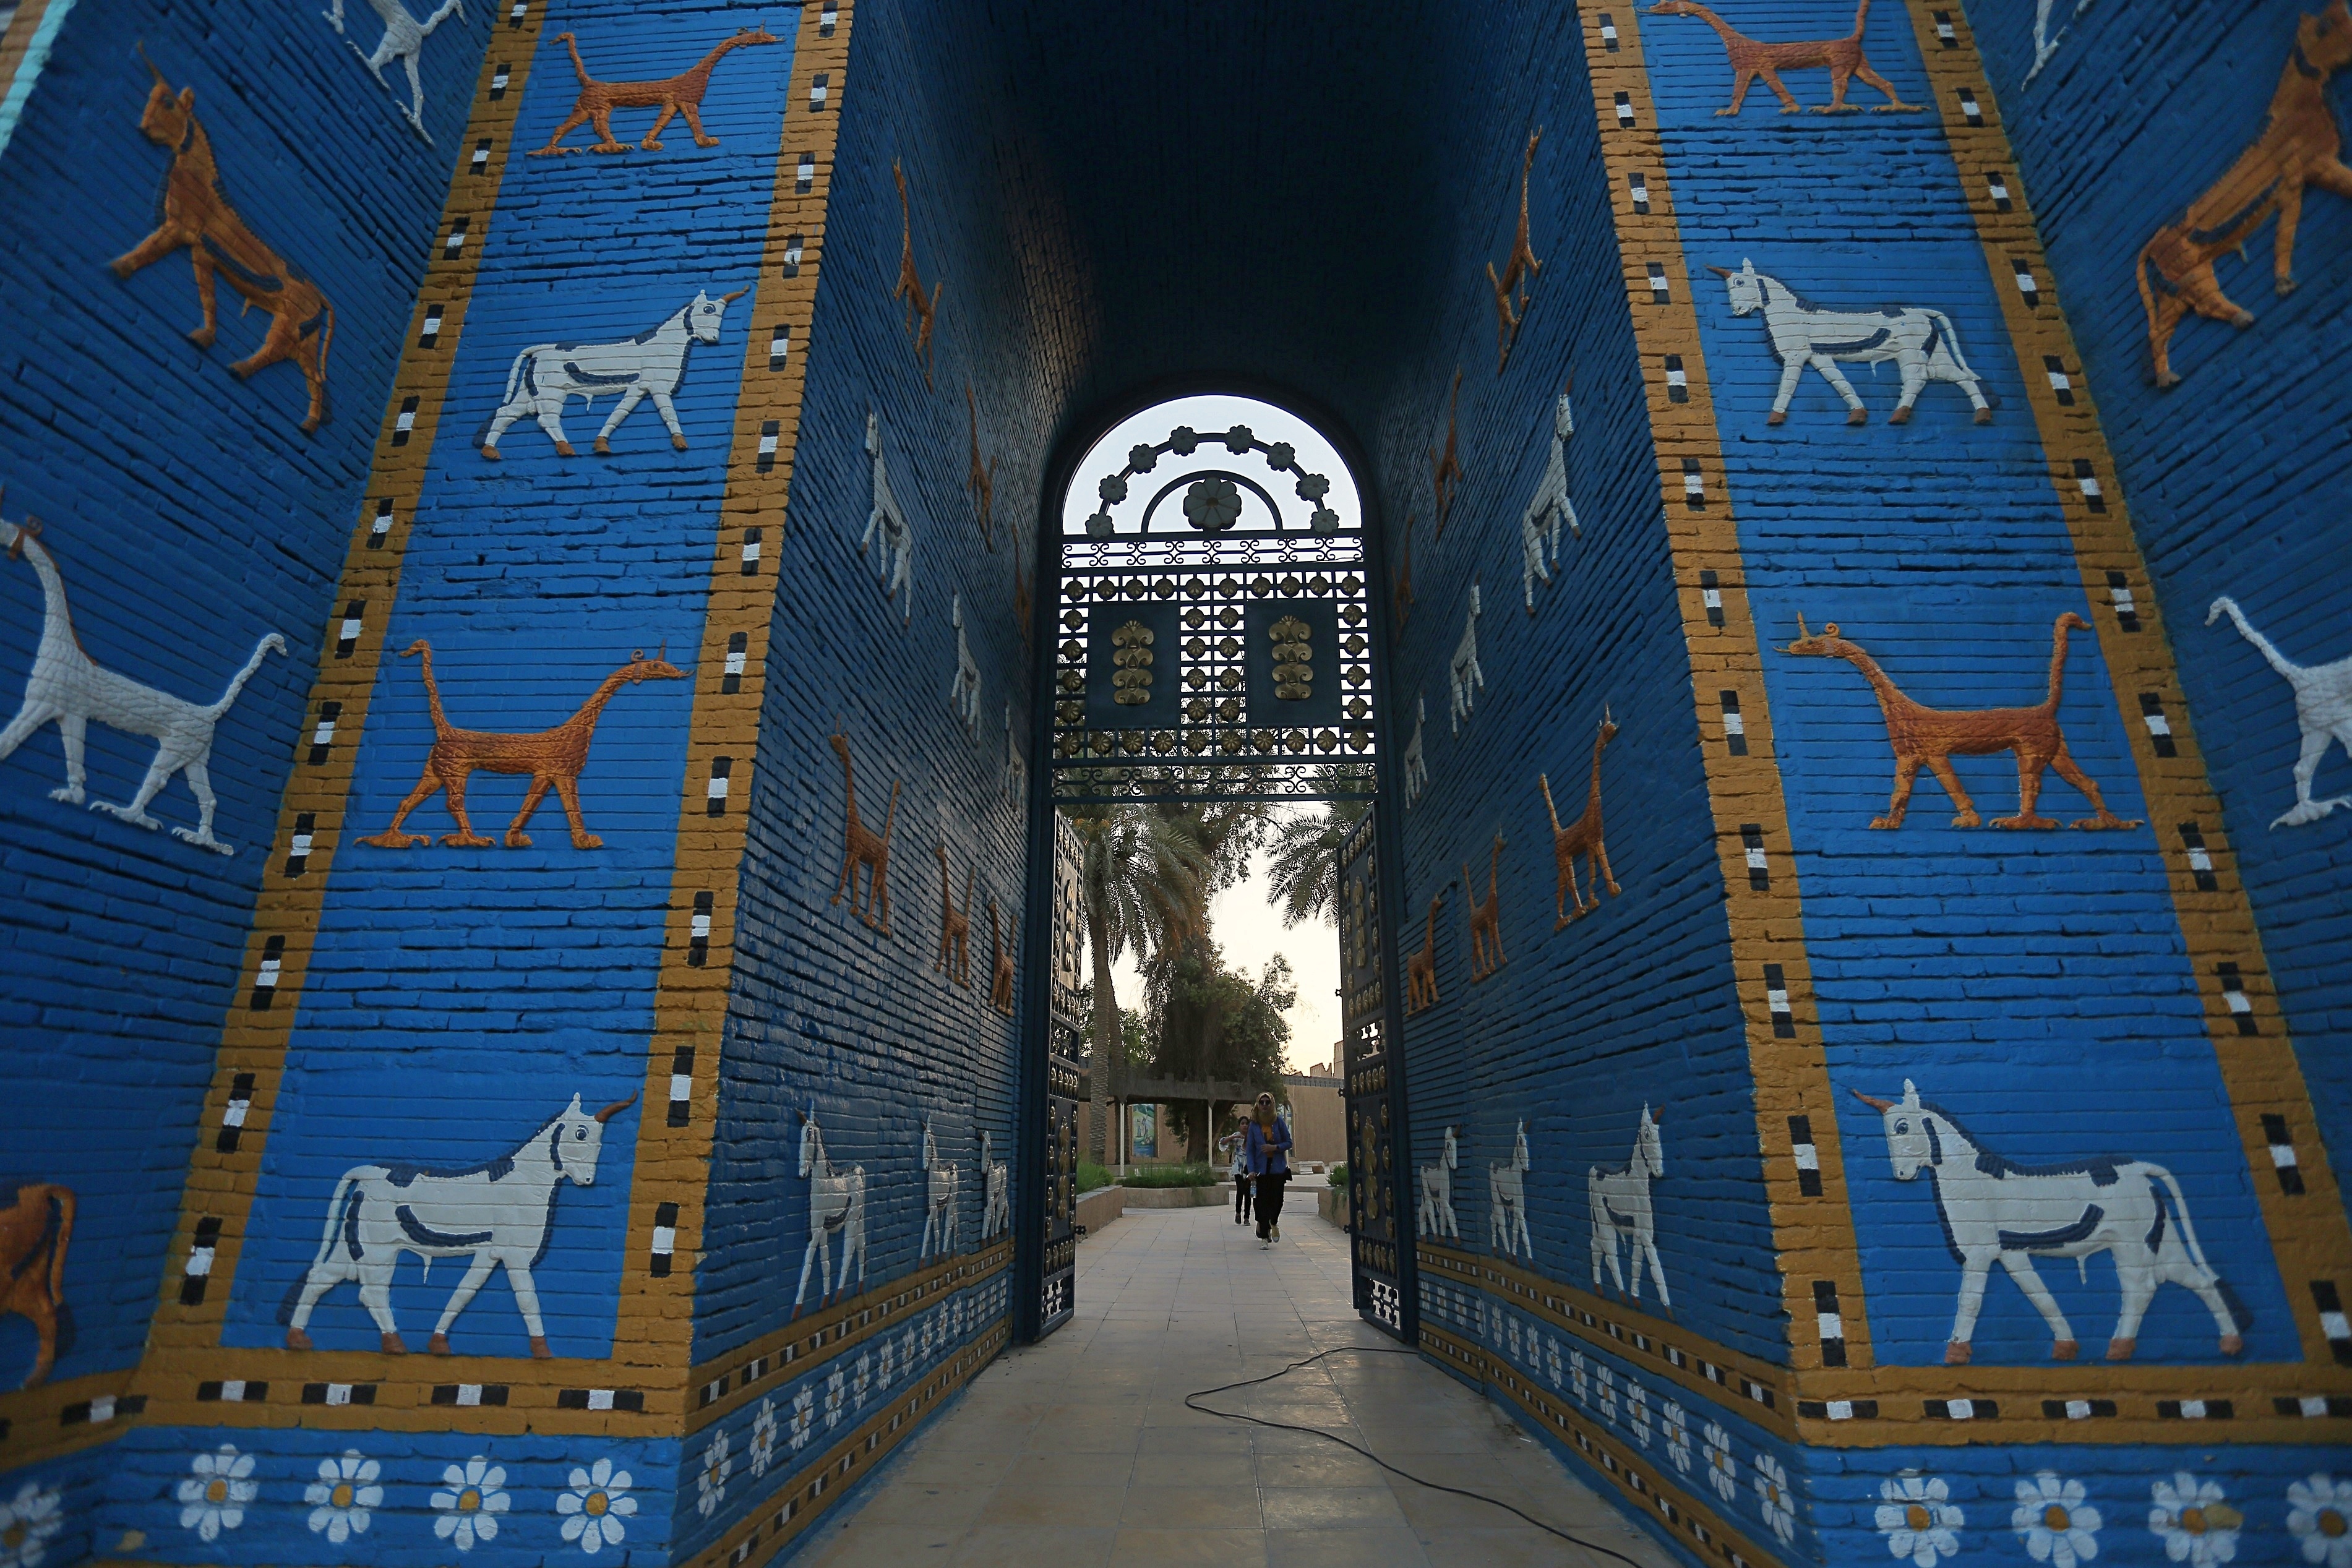 People walk near Ishtar Gate the archaeological site of Babylon, Iraq, Friday, July 5, 2019. Iraq on Friday celebrated the UNESCO World Heritage Committee's decision to name the historic city of Babylon a World Heritage Site in a vote held in Azerbaijan's capital, years after Baghdad began campaigning for the site to be added to the list. (AP Photo/Anmar Khalil)